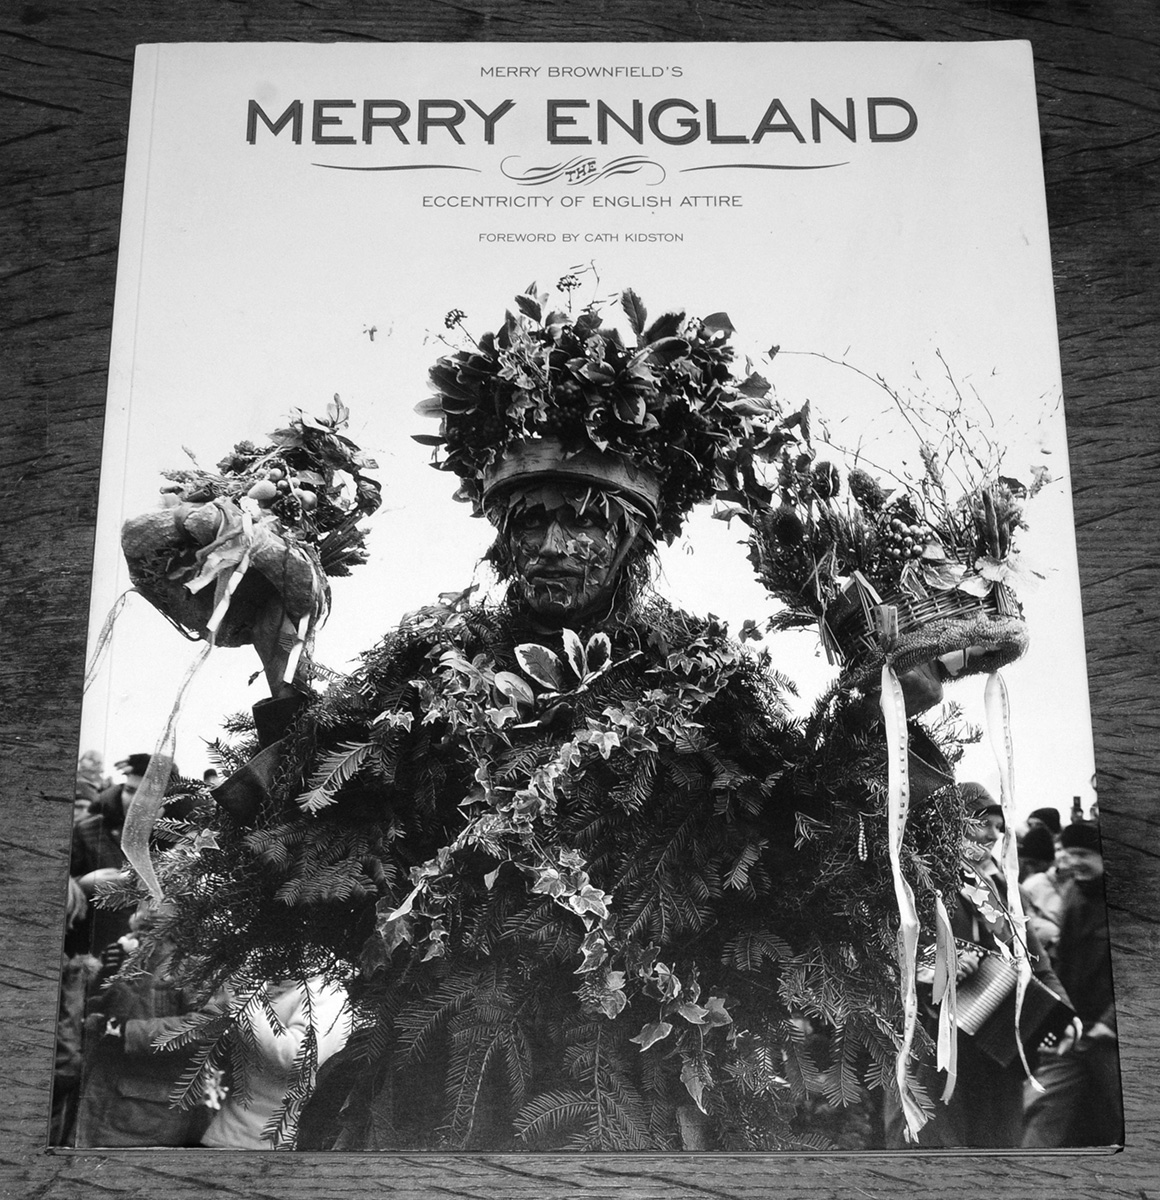 day-3a-merry-england-merry-brownfield-folk-costume-a-year-in-the-country-1